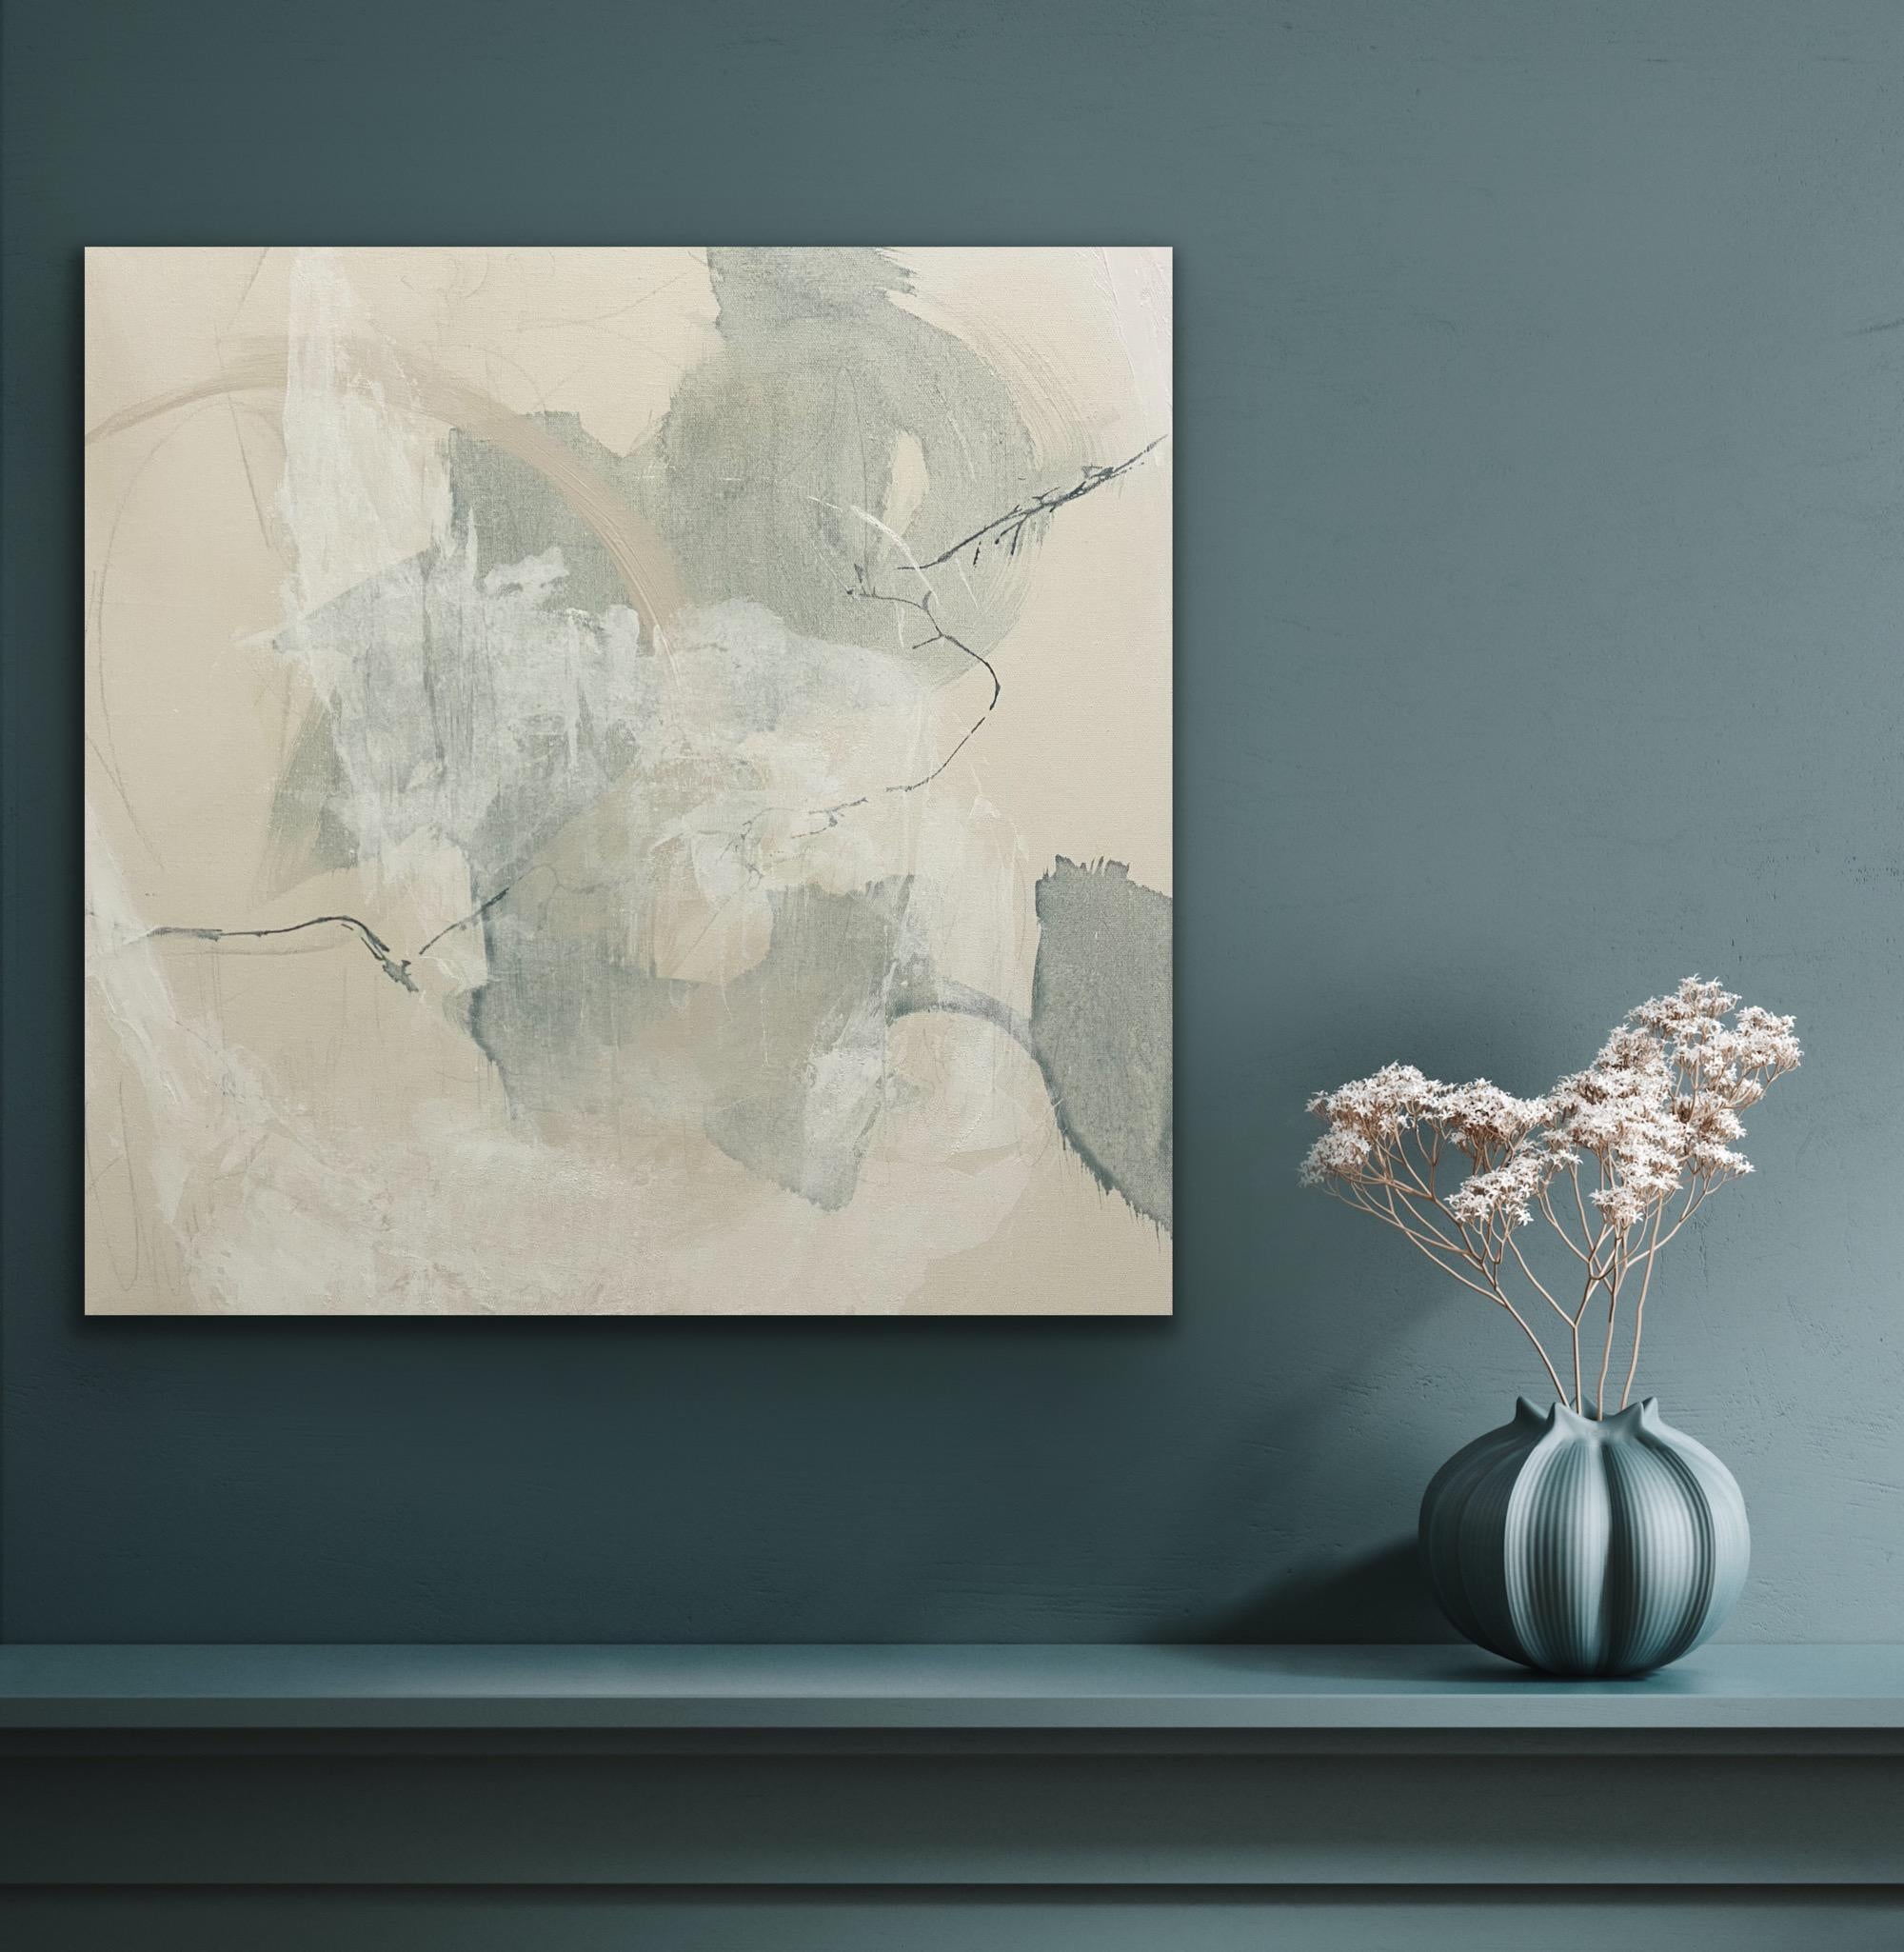 Articulate 7, contemporary abstract, seafoam, tan, white 24x24 inches For Sale 7